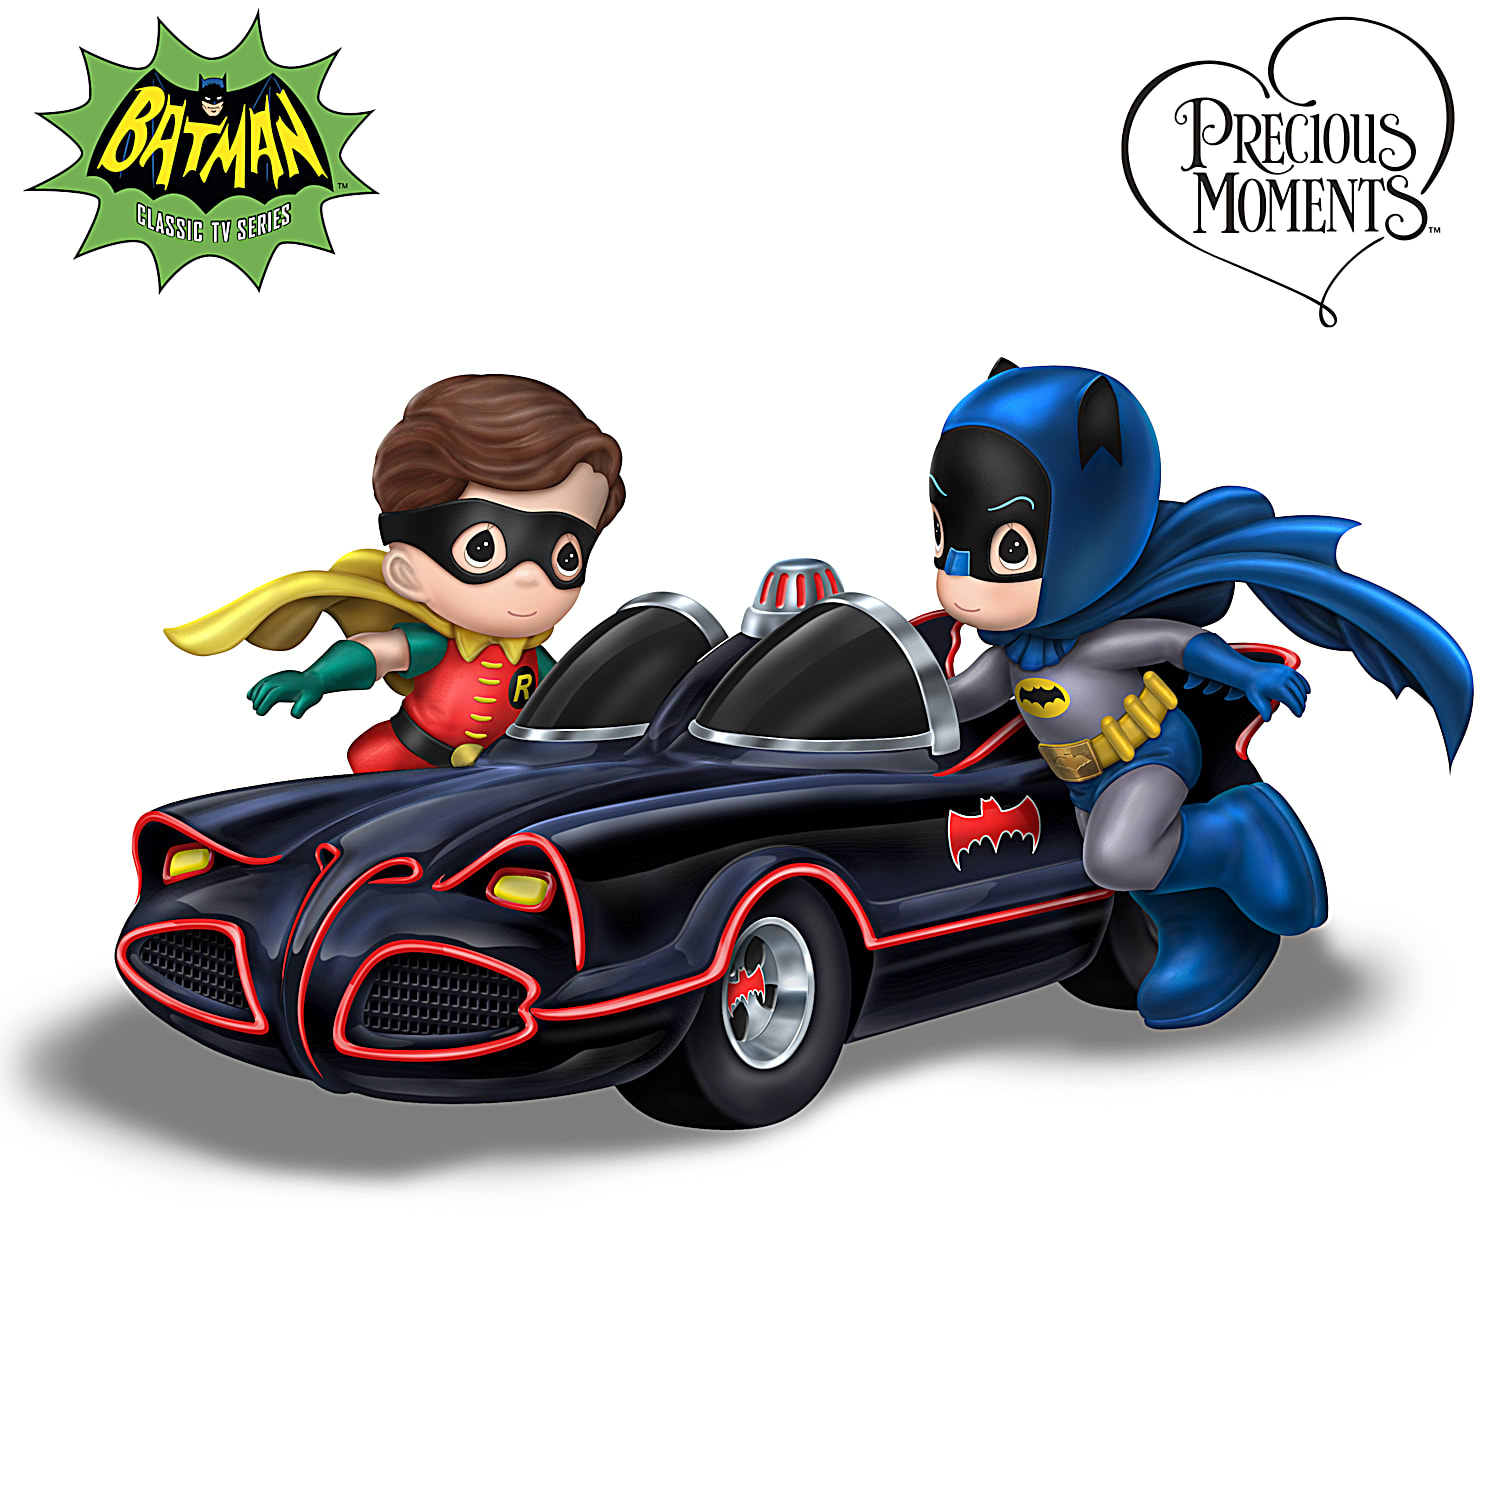 Precious Moments BATMAN & ROBIN Heroes At Heart Hand-Painted Figurine  Featuring The DYNAMIC DUO As They Leap Into The BATMOBILE Inspired By BATMAN  Classic TV Series